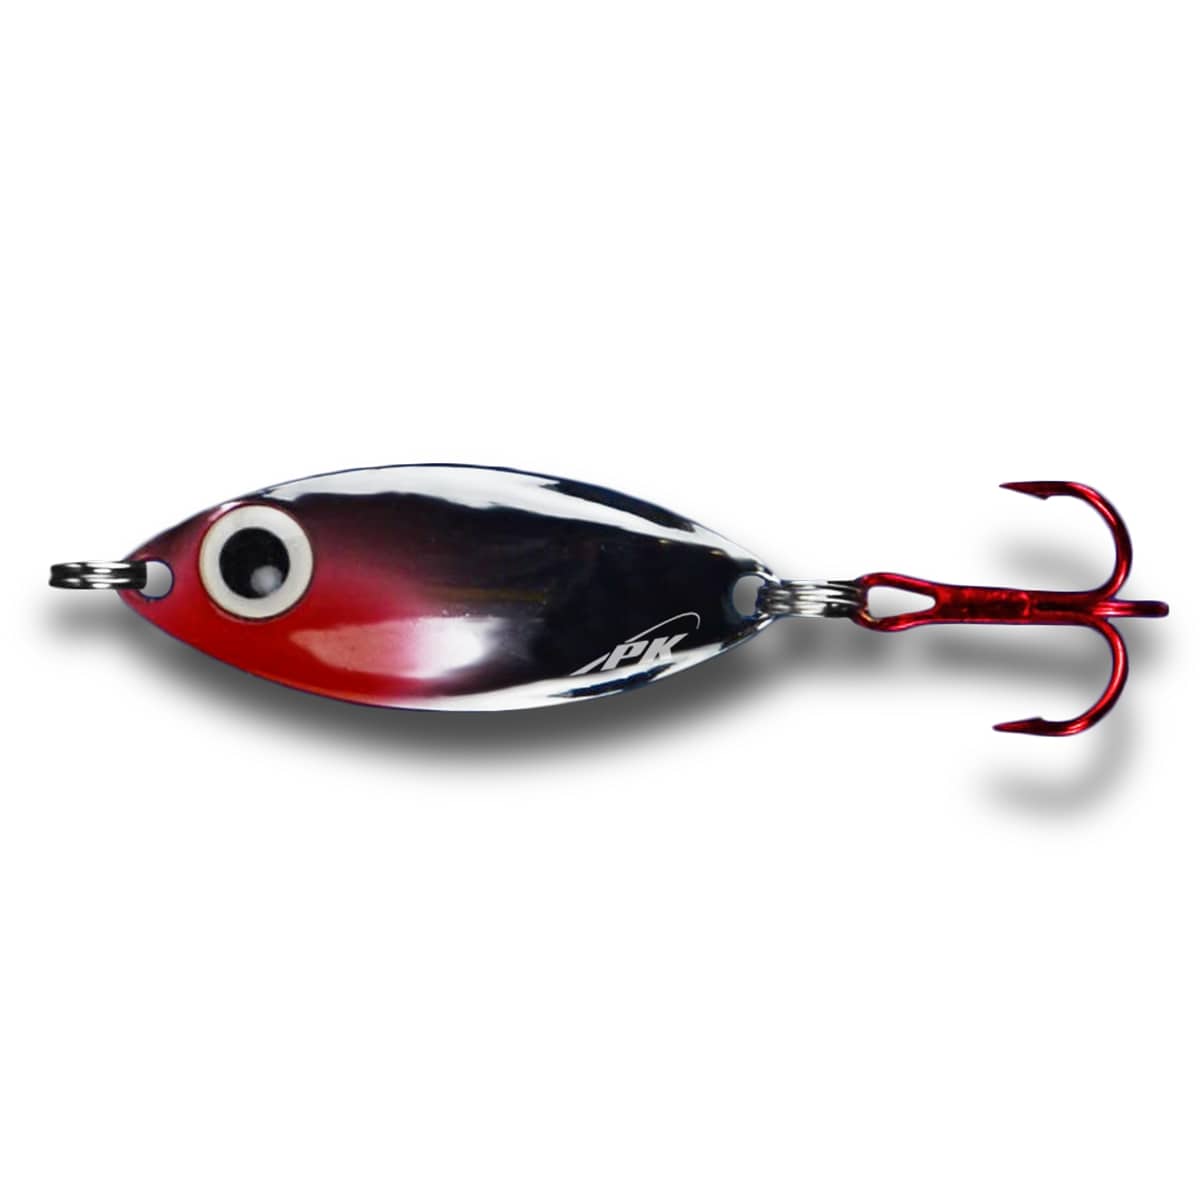  PEETZ Anchovy Spoon Lure - 'Holy Roller' Cut-Plug, 4-Inch, Handcrafted, Premium Quality, 12g/0.4oz Stainless Steel